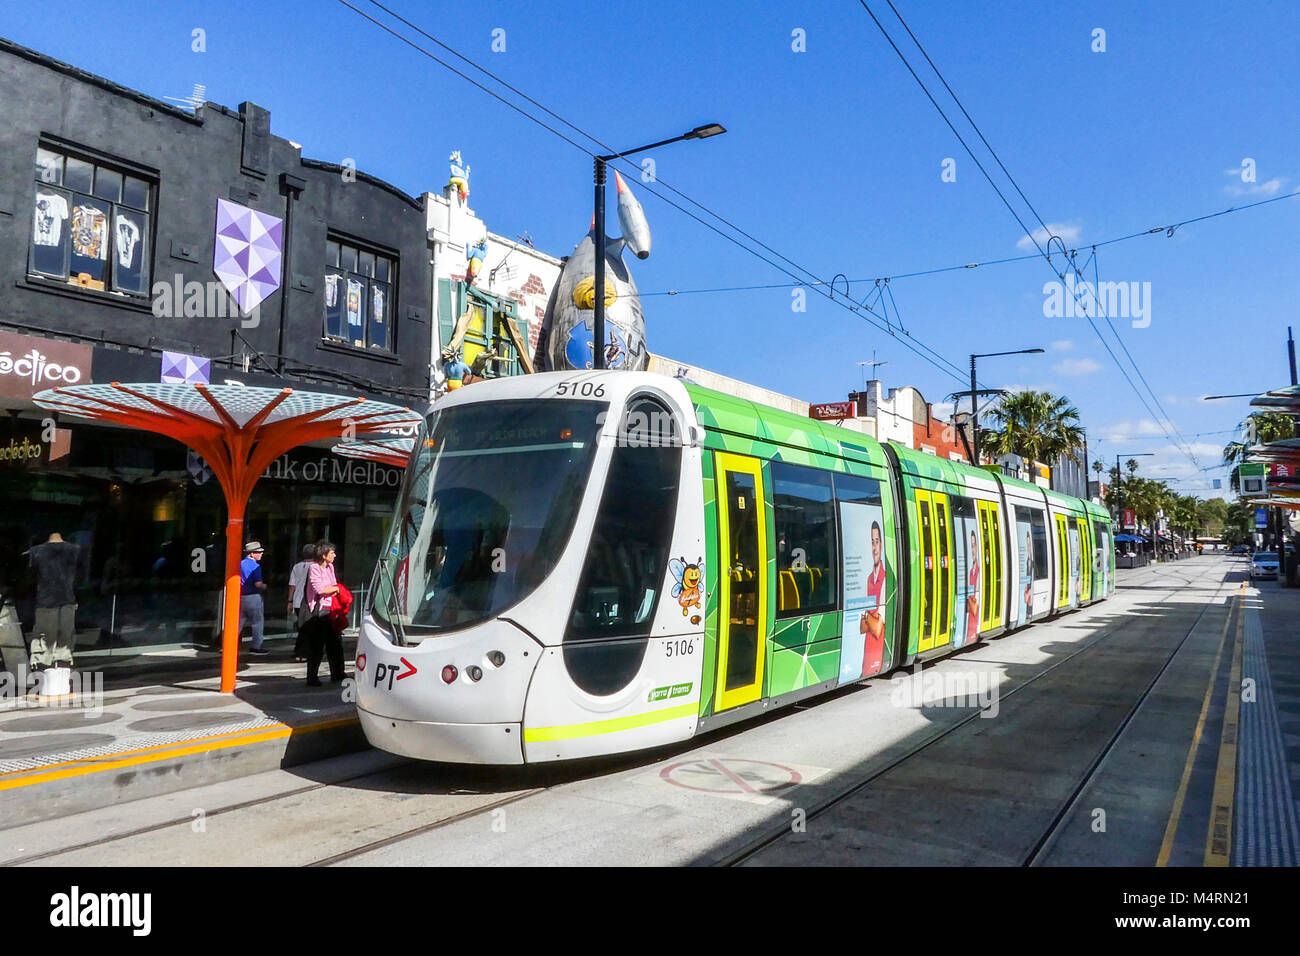 St Kilda, Melbourne, Australia: March 06, 2017: An electric tram arrives at the Acland Street tram stop in St Kilda. Stock Photo